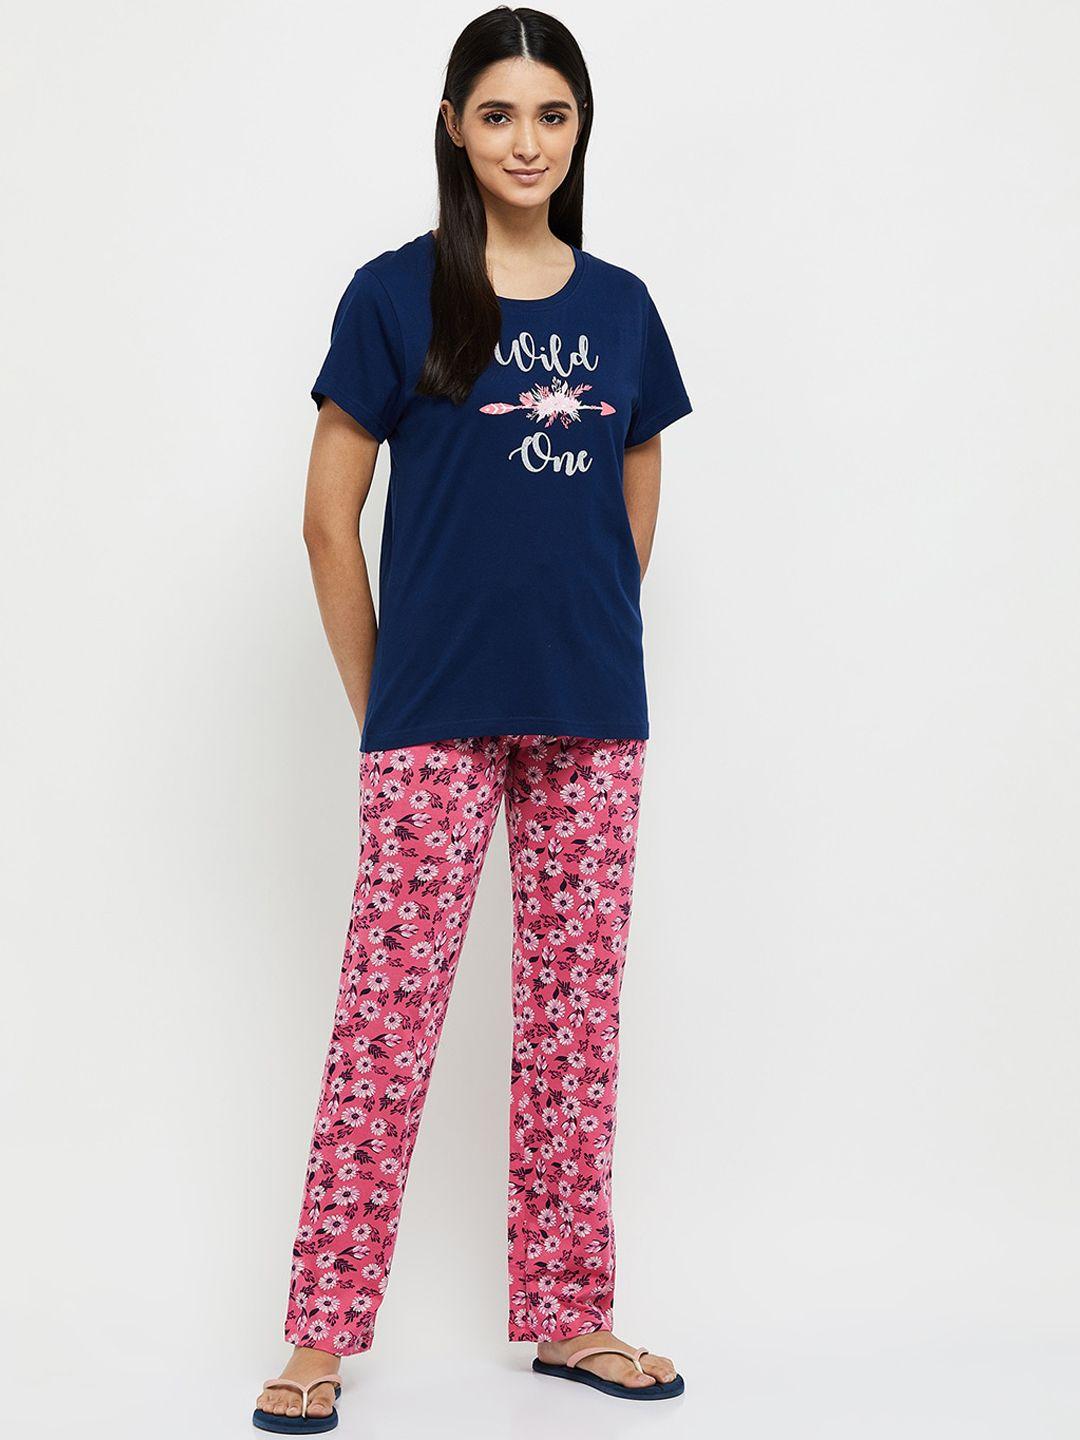 max women navy blue & pink floral printed night suit